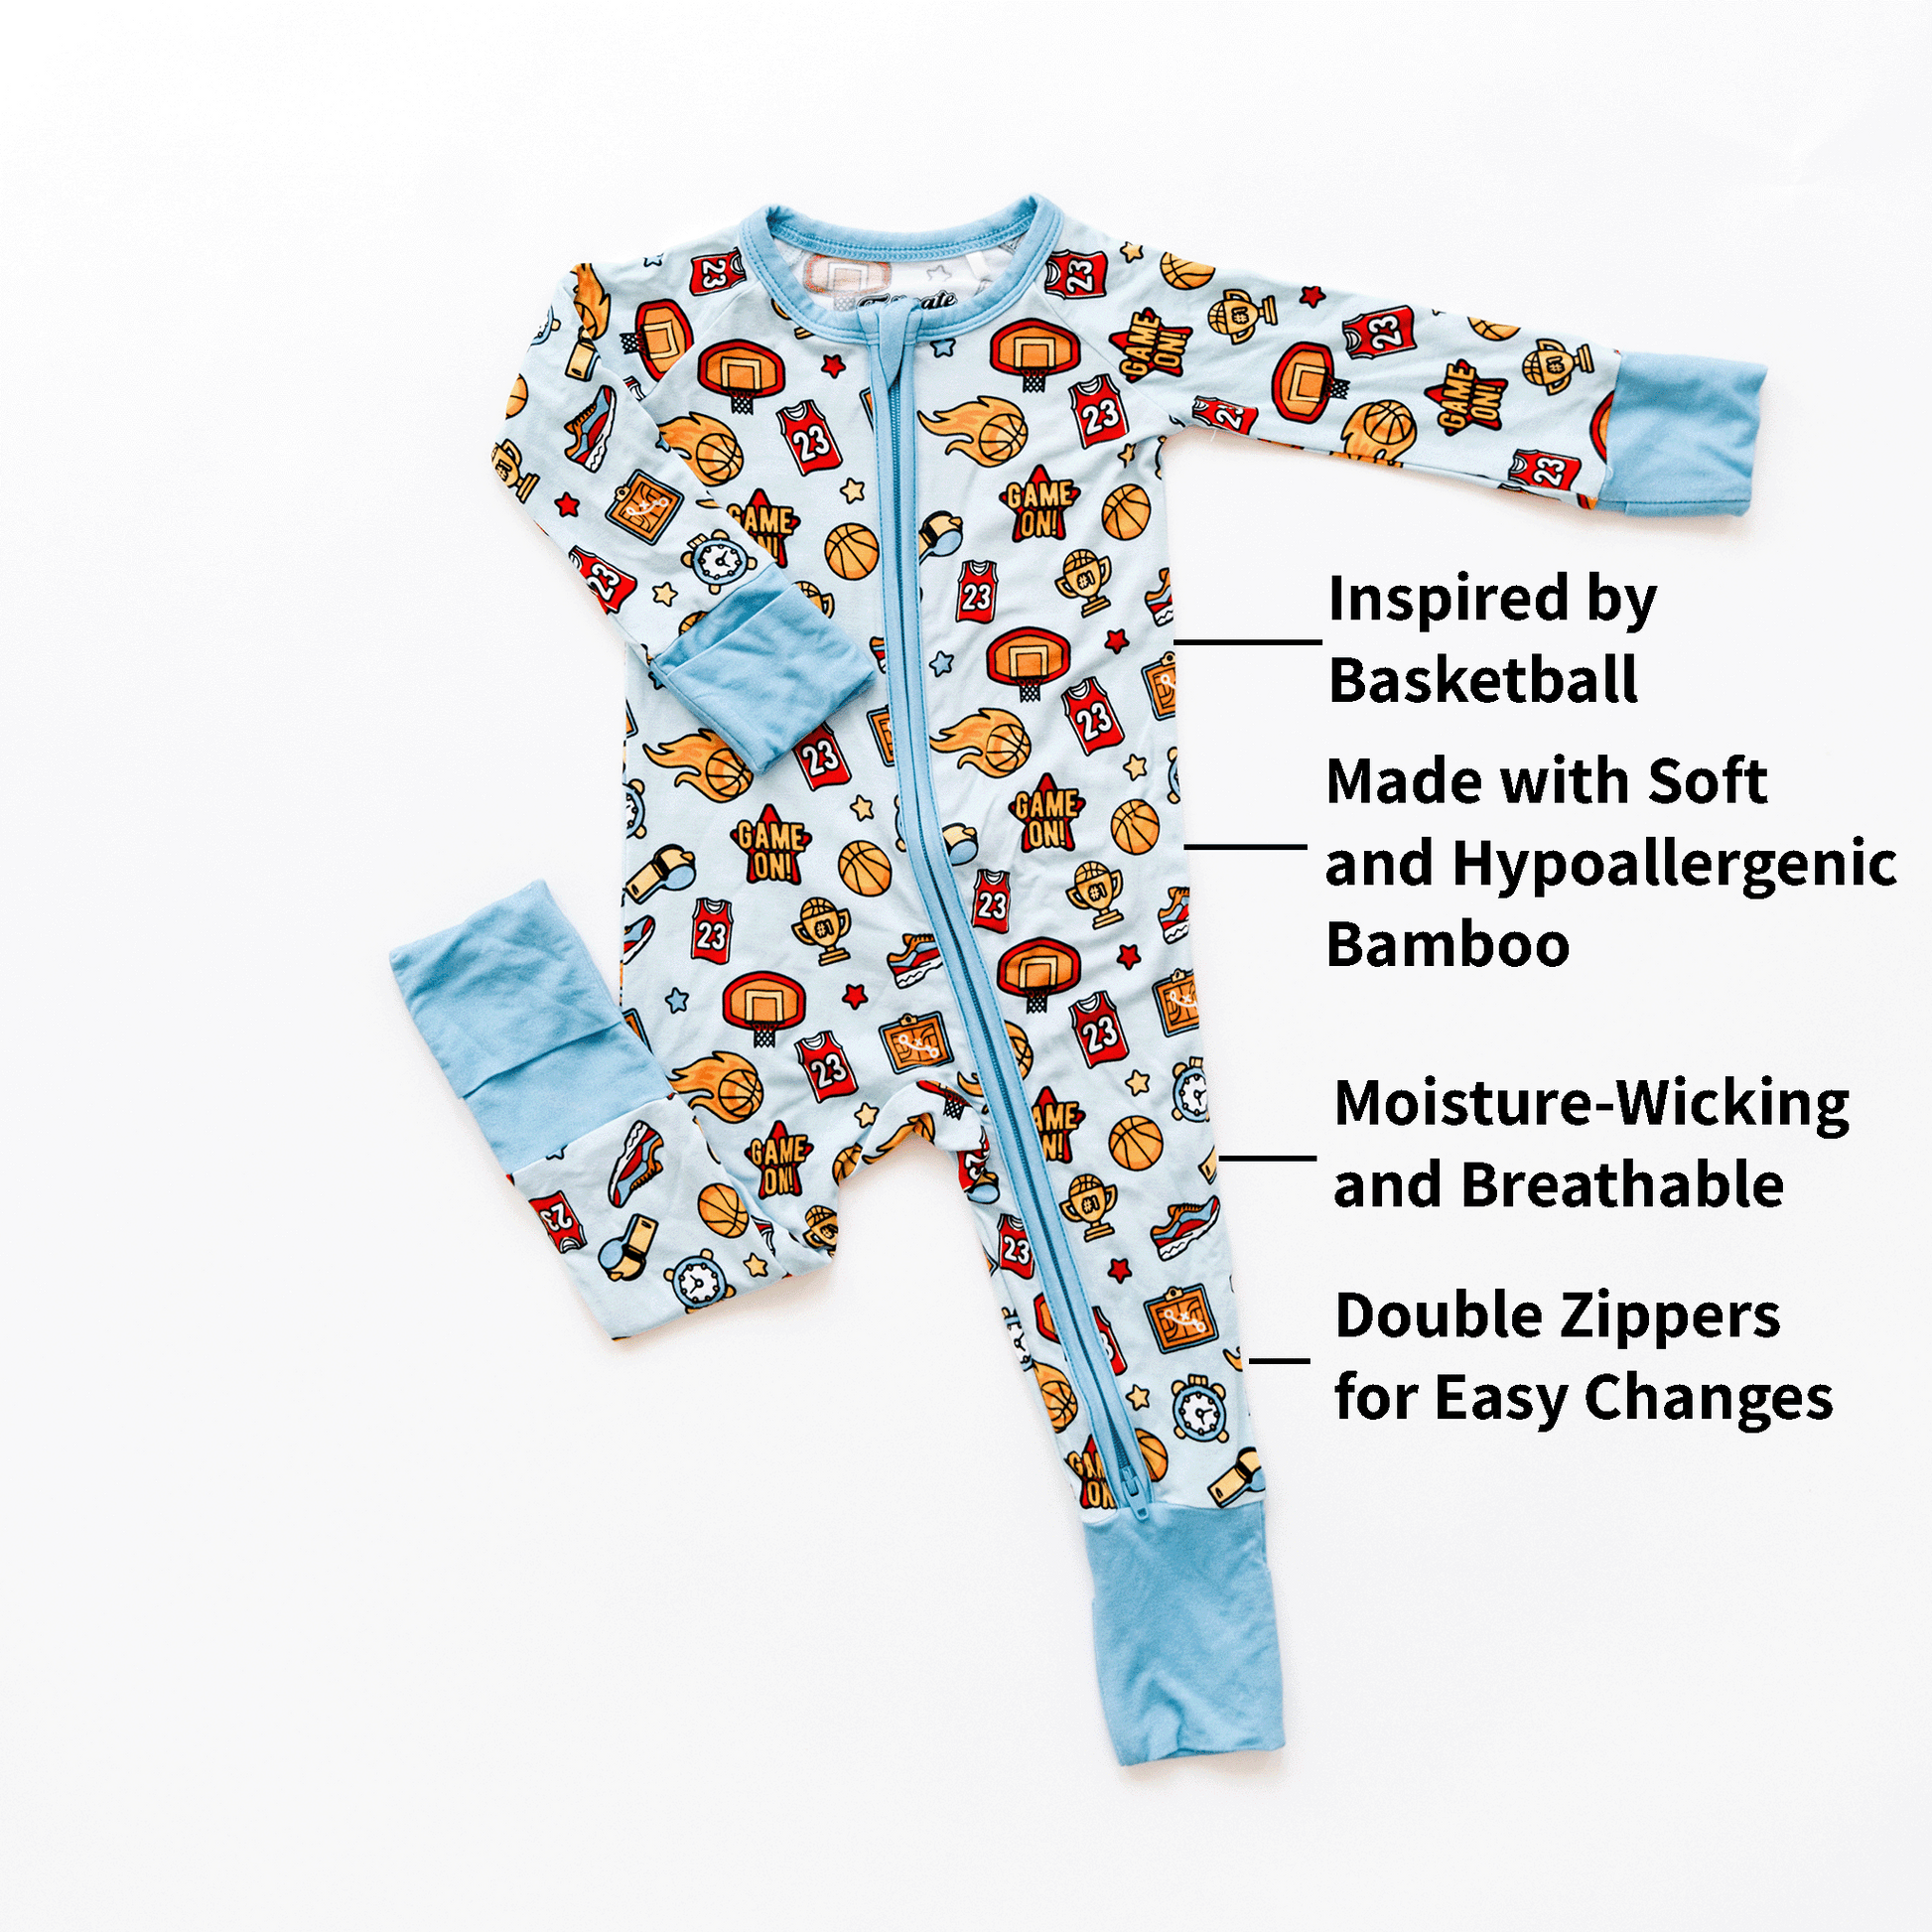 A light blue Basketball Onesie for infants displayed on a white background. The Tailgate Tikes onesie features playful basketball-themed prints, including basketballs, jerseys with the number 23, and other related items. Text highlights on the onesie describe its features and materials.